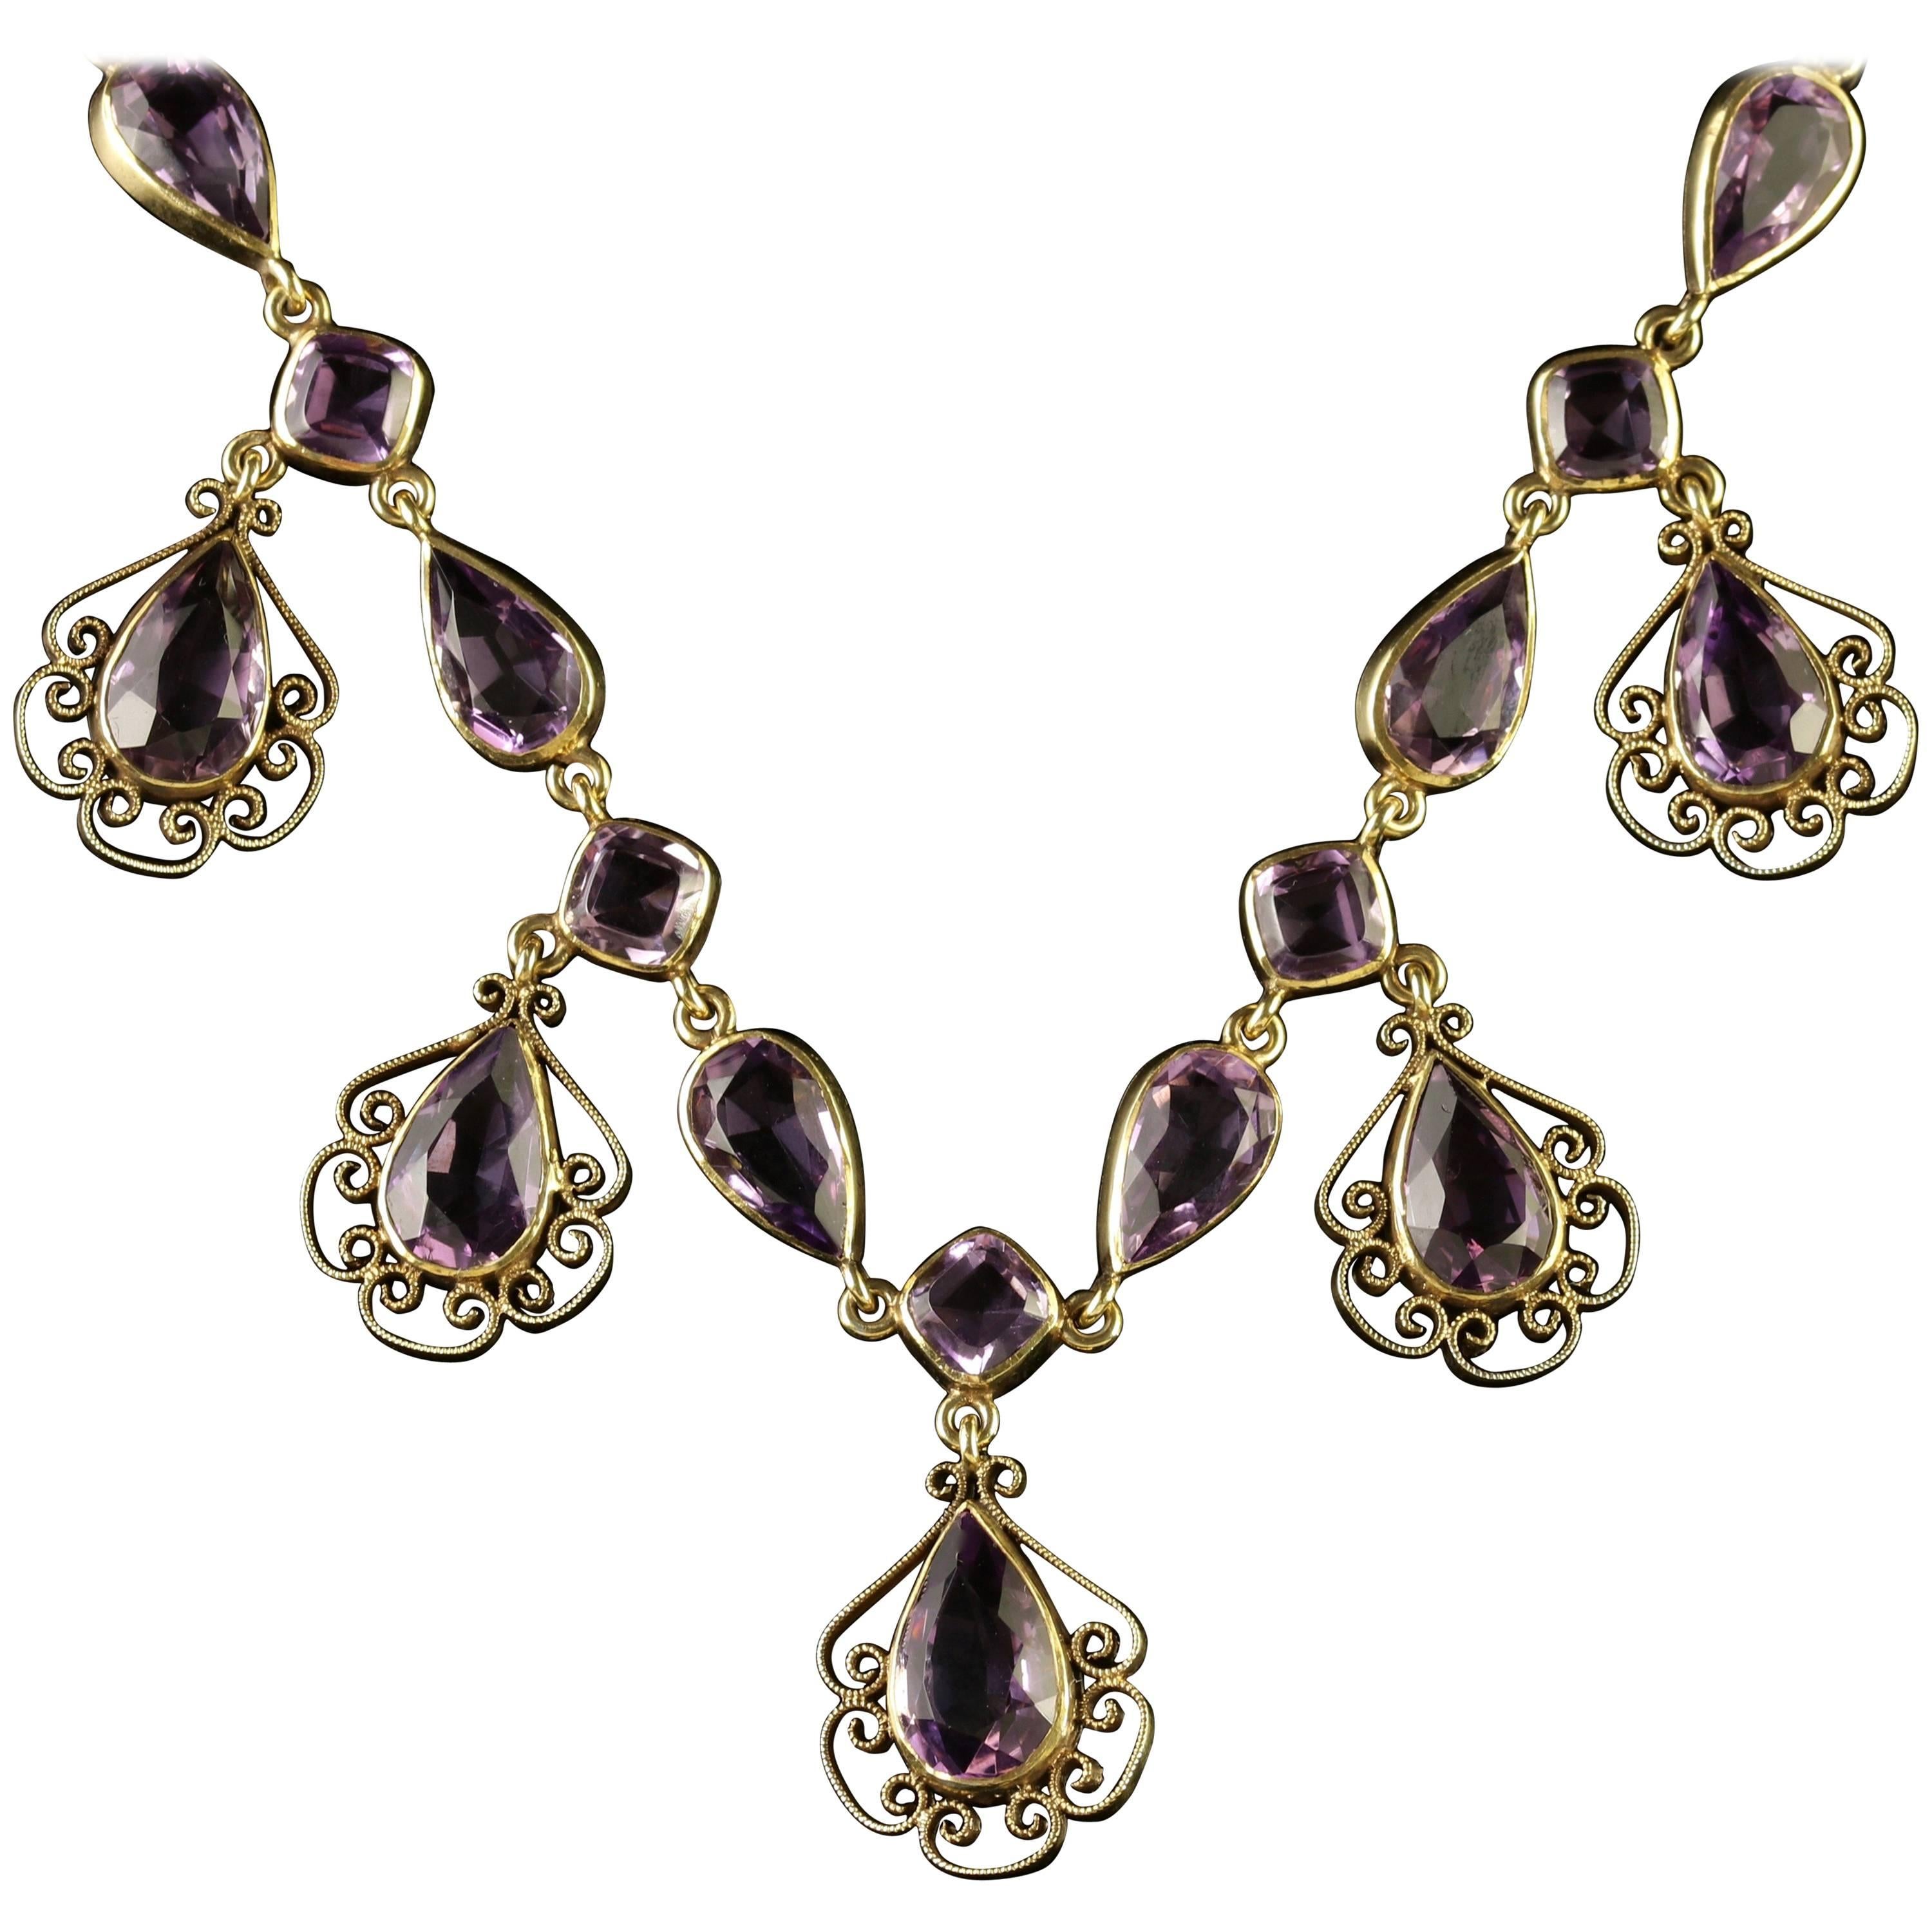 Antique Victorian Amethyst Gold Garland Necklace, circa 1900 For Sale